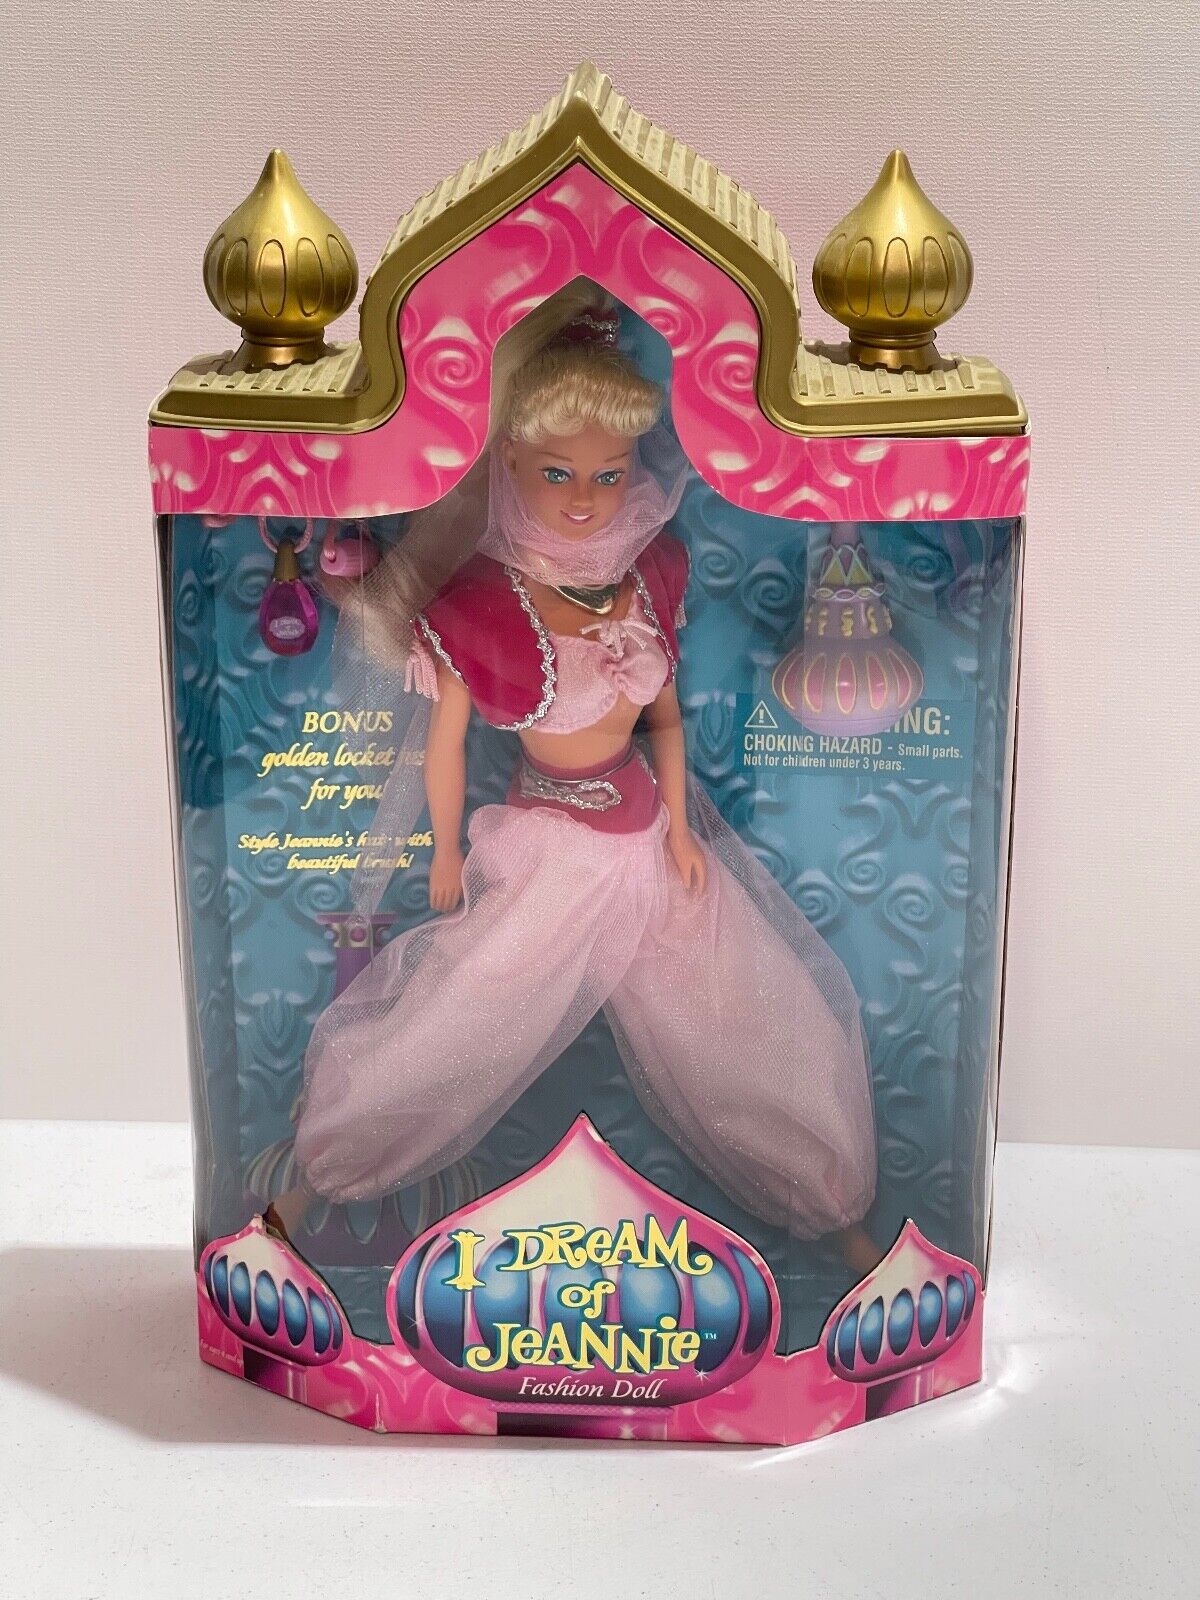 1996 “I Dream Of Jeannie” Collectable Fashion Doll New in box vintage B9